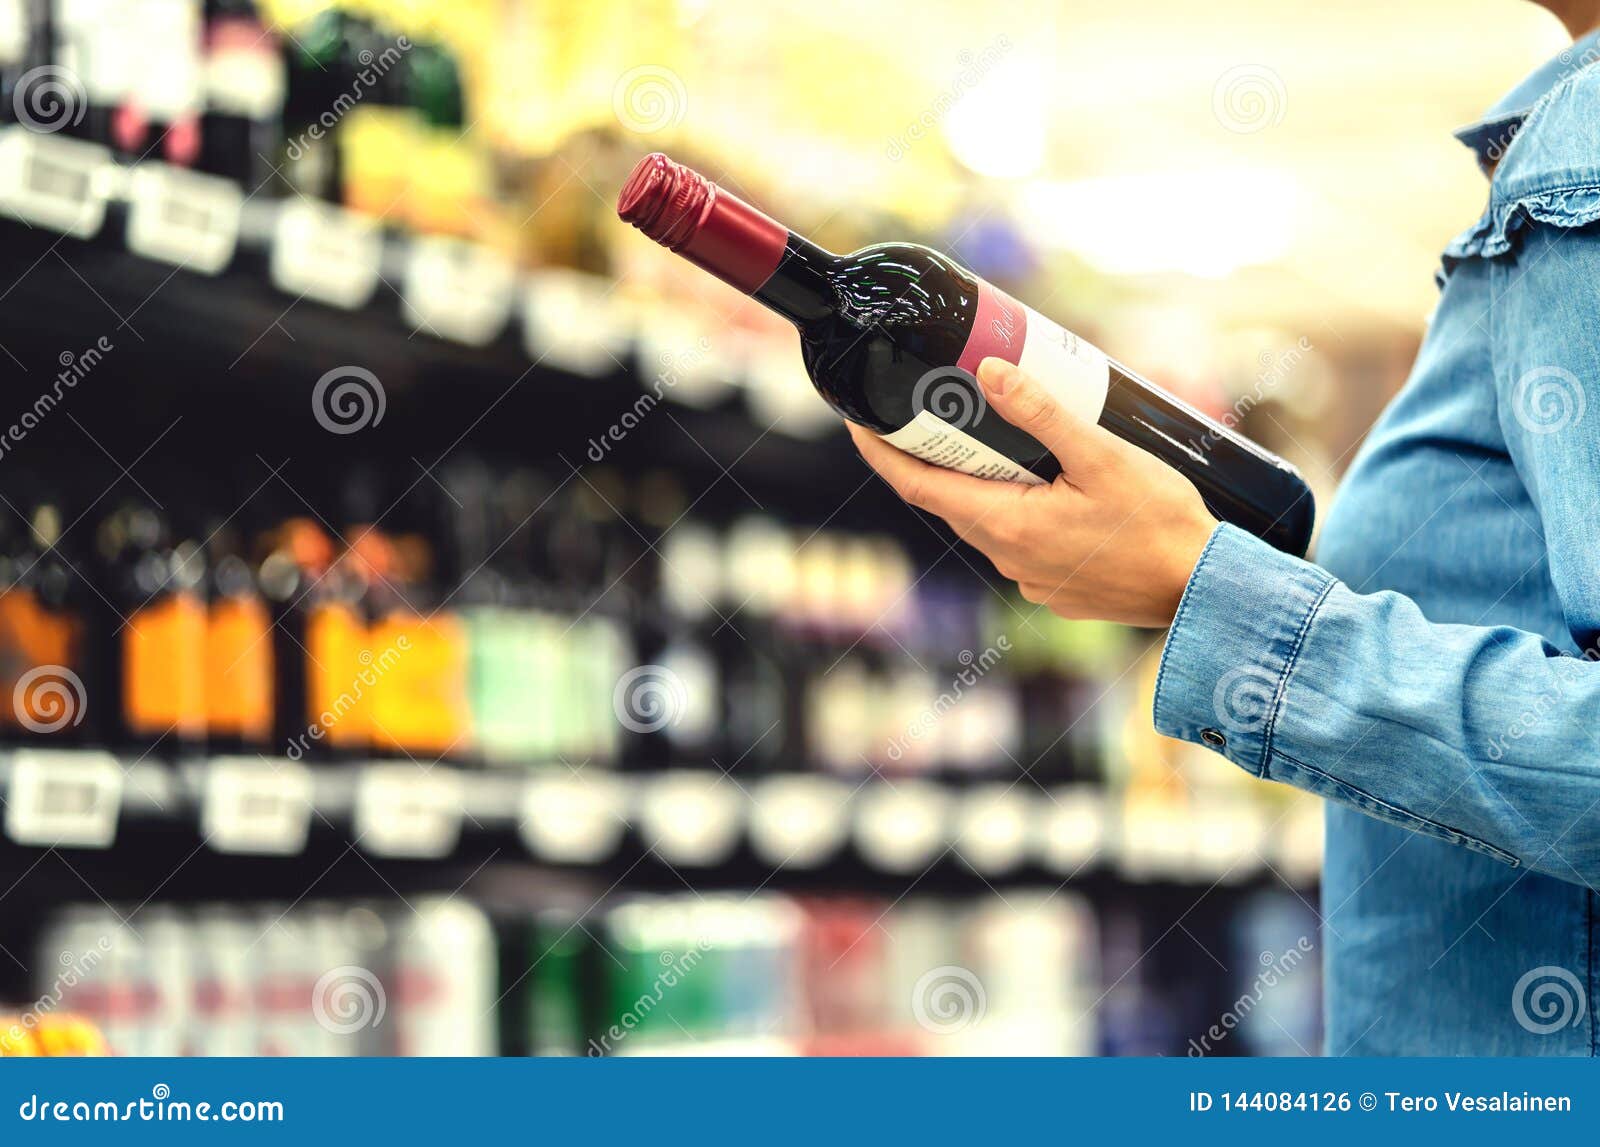 alcohol shelf in liquor store or supermarket. woman buying a bottle of red wine and looking at alcoholic drinks in shop.